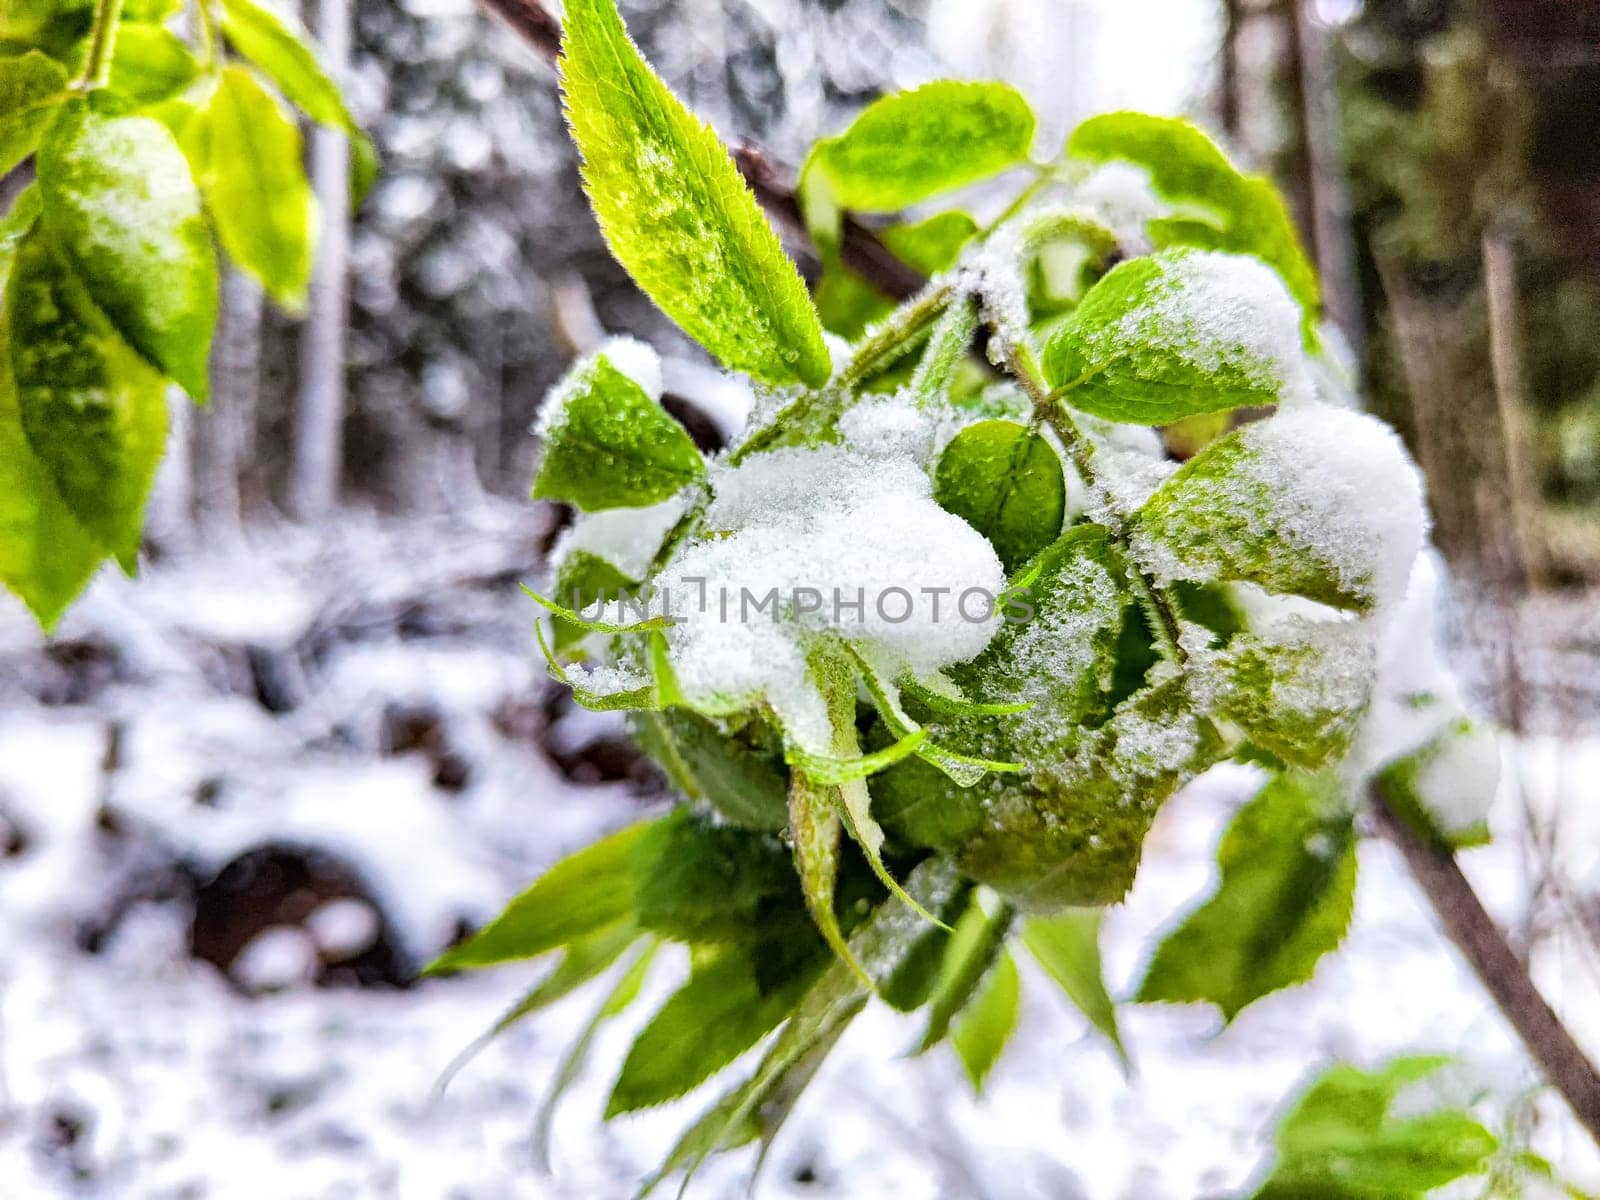 Snow on green leaves. Early spring or autumn. Cold weather, nature. Green leaves dusted with snow in a forest during early spring